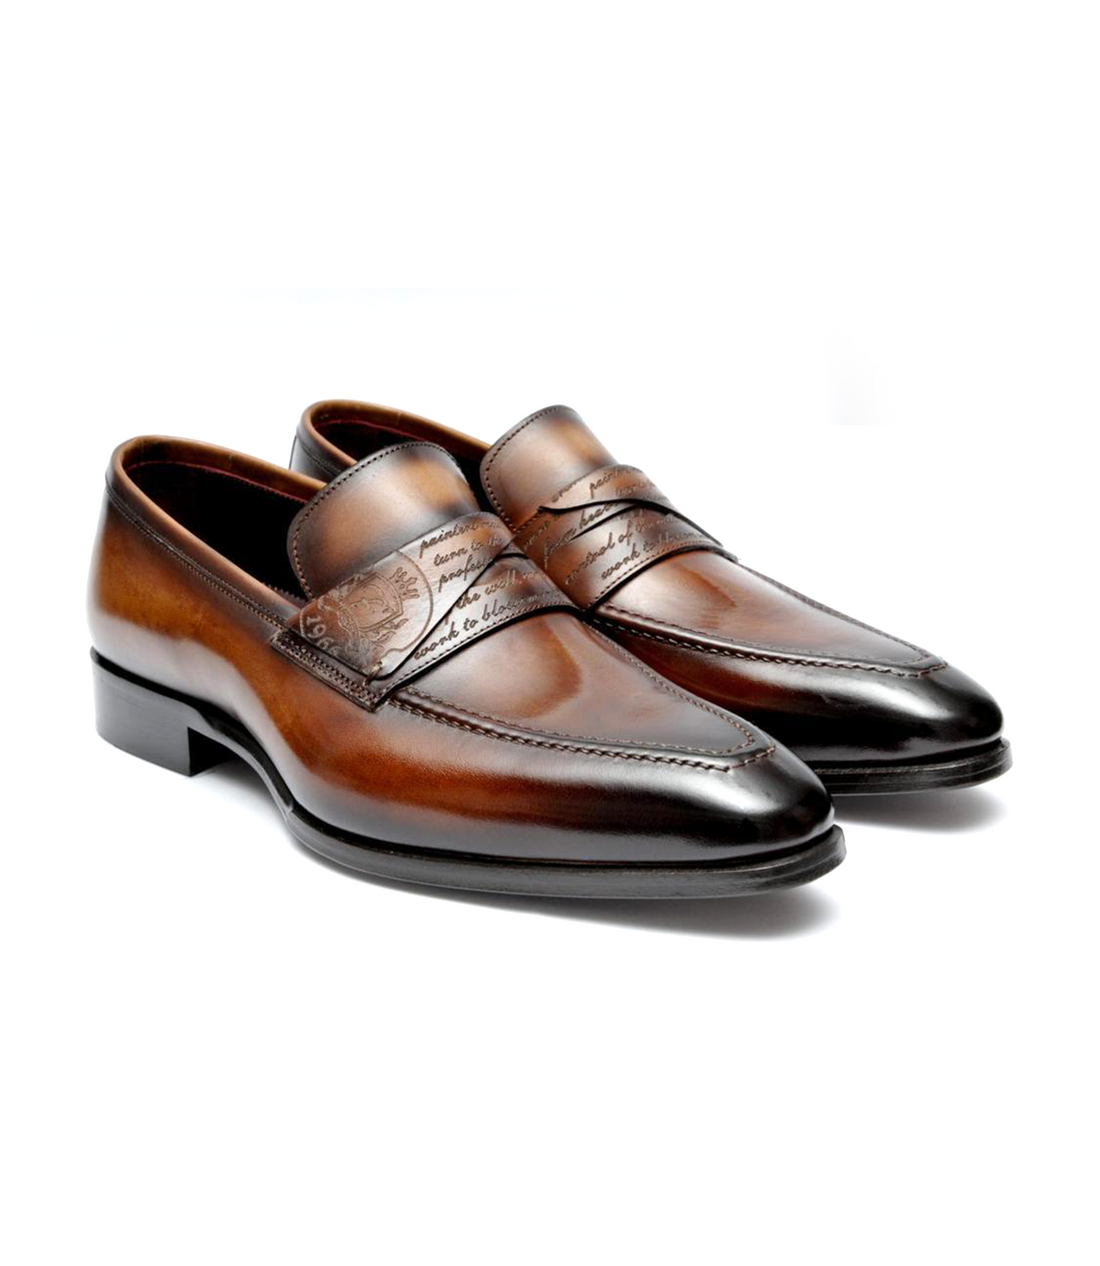 FILANGIERI - STAINED BROWN LEATHER DRESS LOAFERS WITH CURSIVE ON IN-STEP